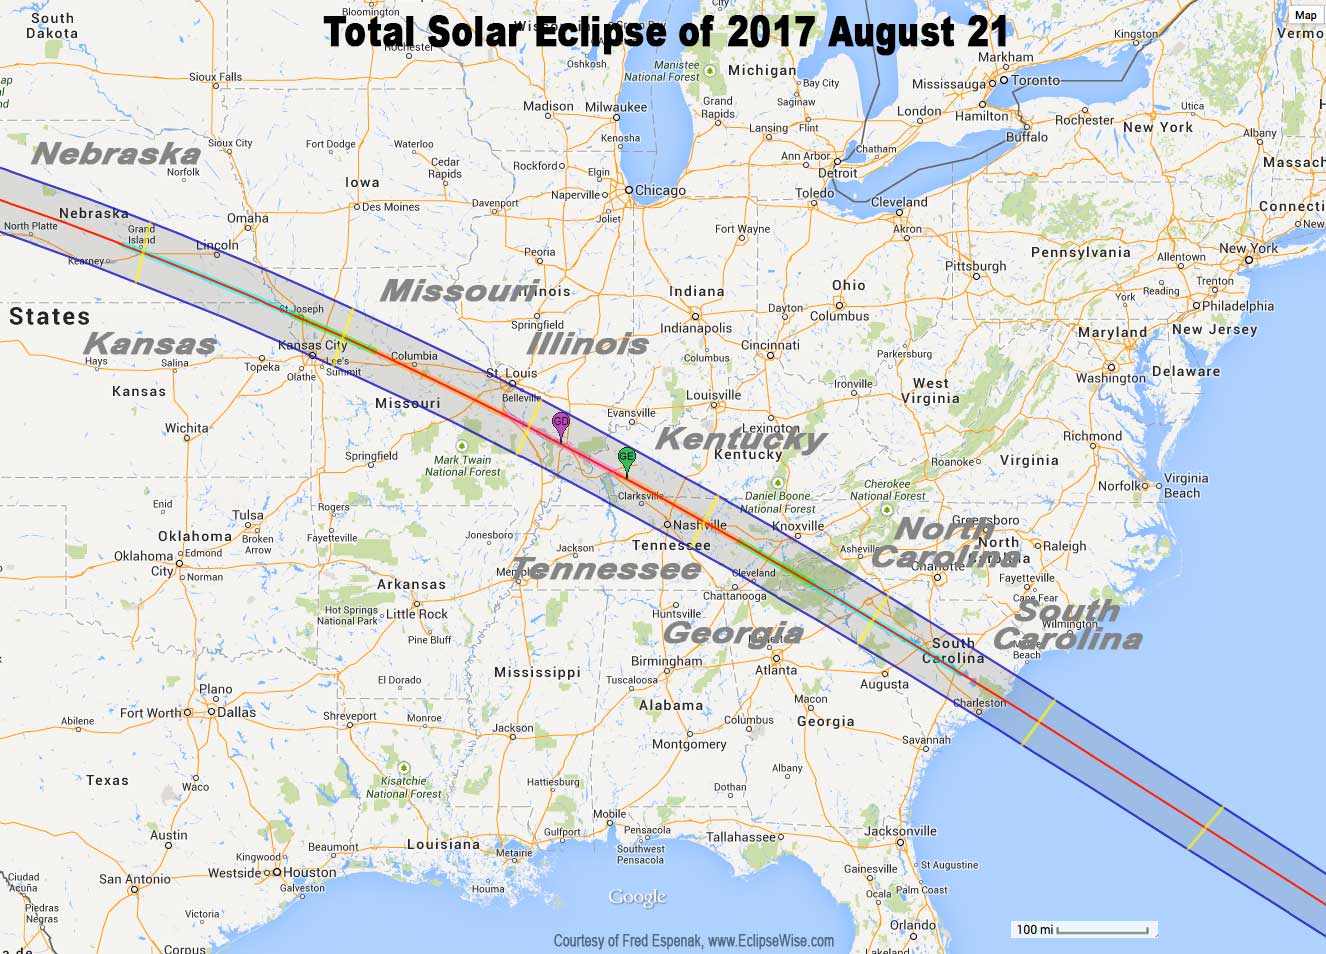 Total Eclipse of the Sun: August 21, 2017